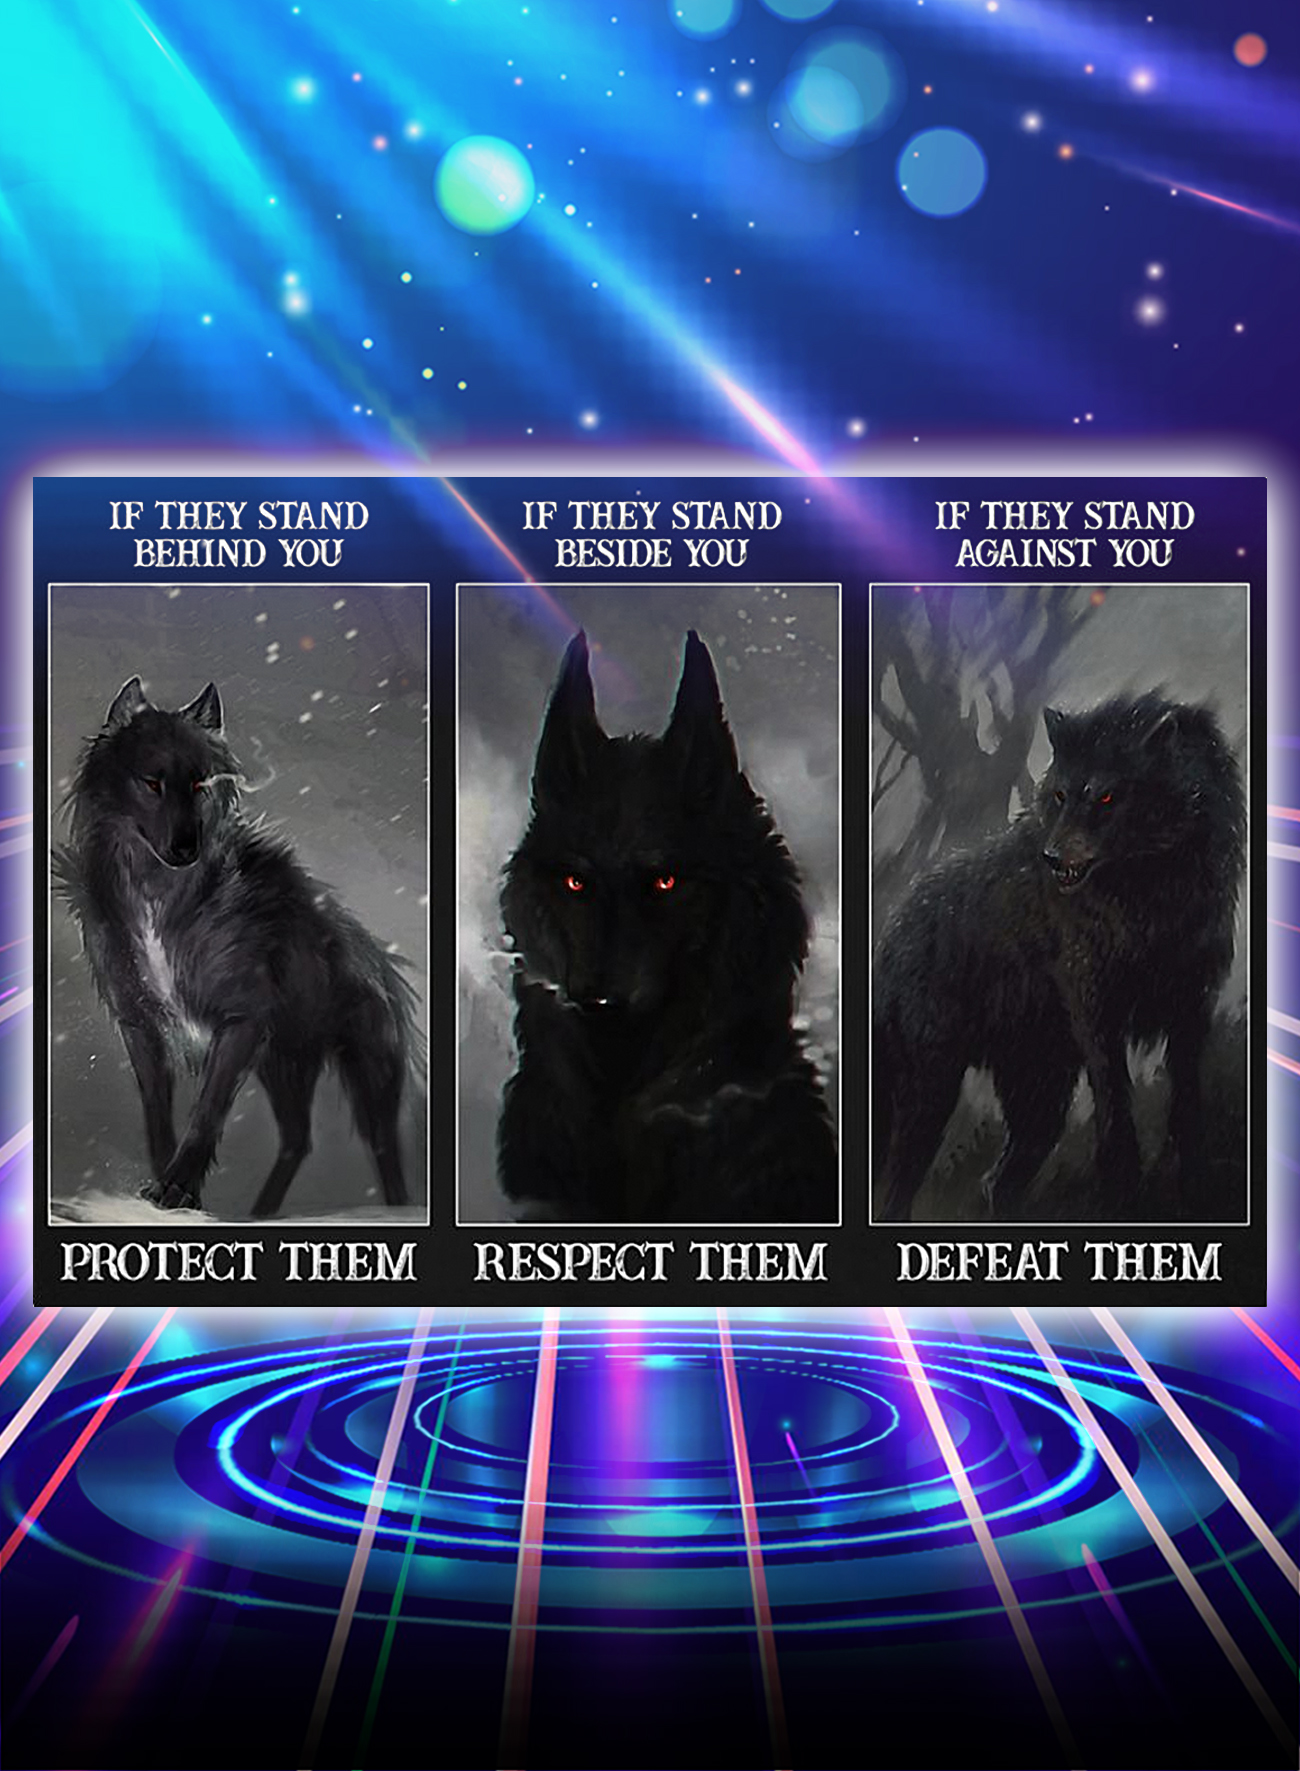 Wolf if they stand behind you protect them poster - A4